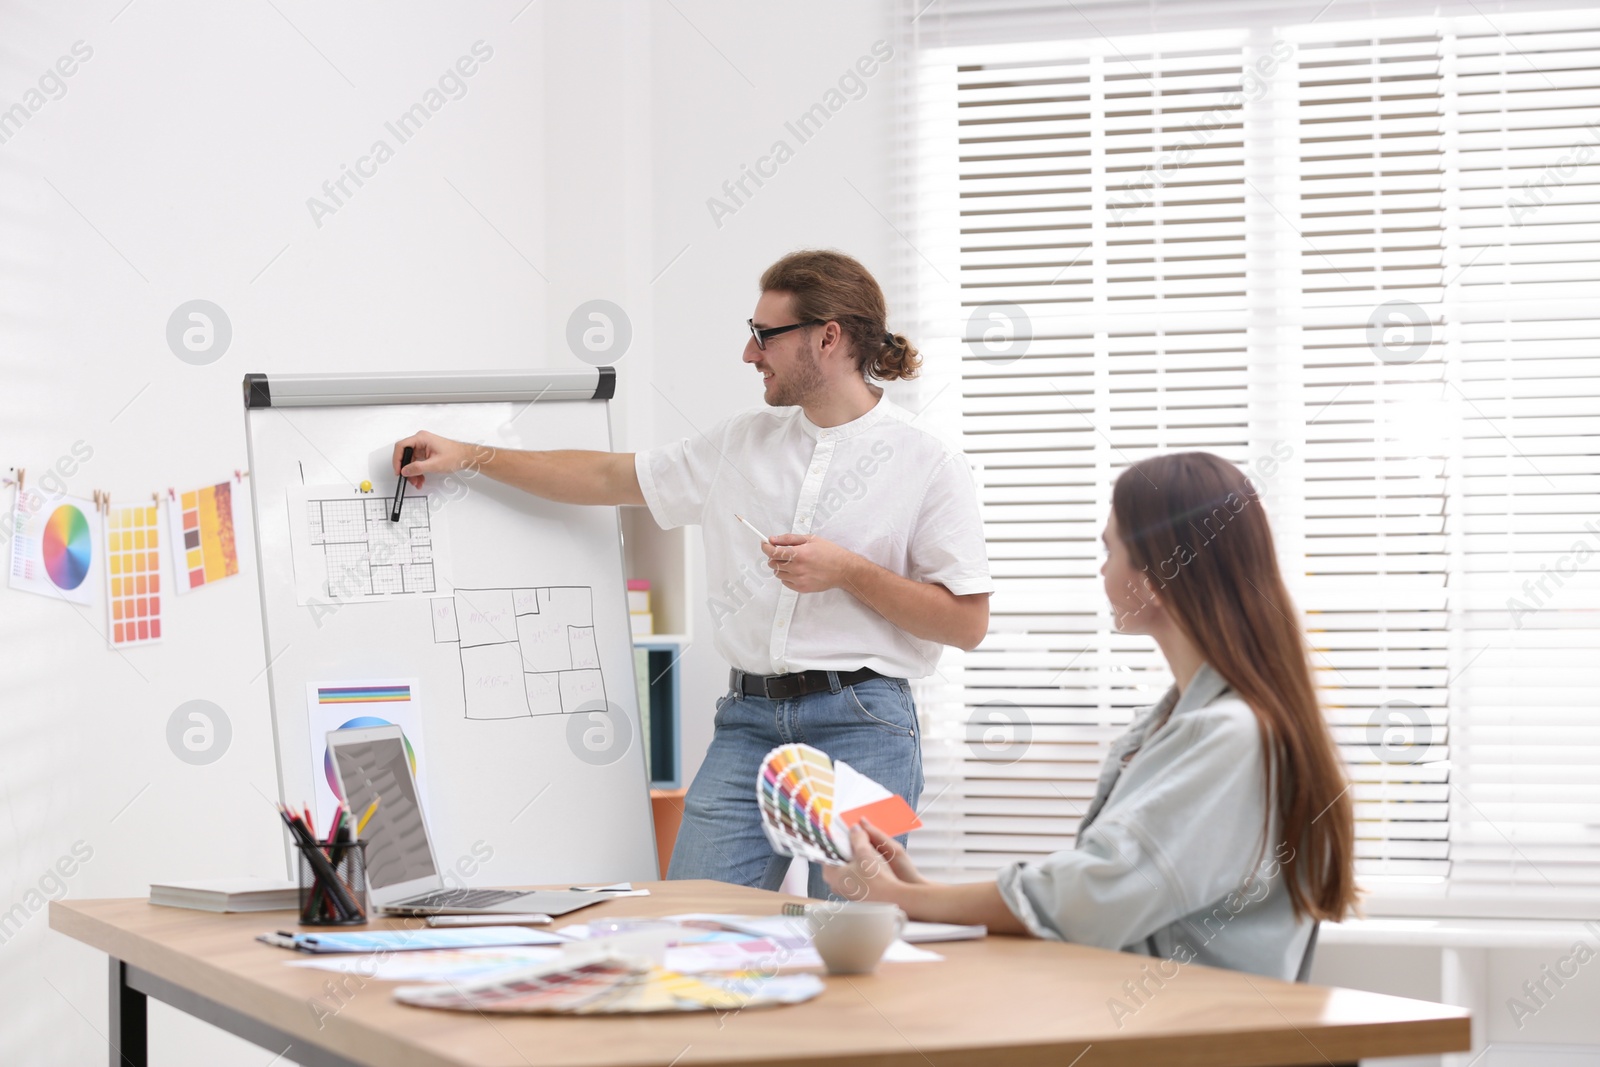 Photo of Professional interior designer near whiteboard and colleague in office